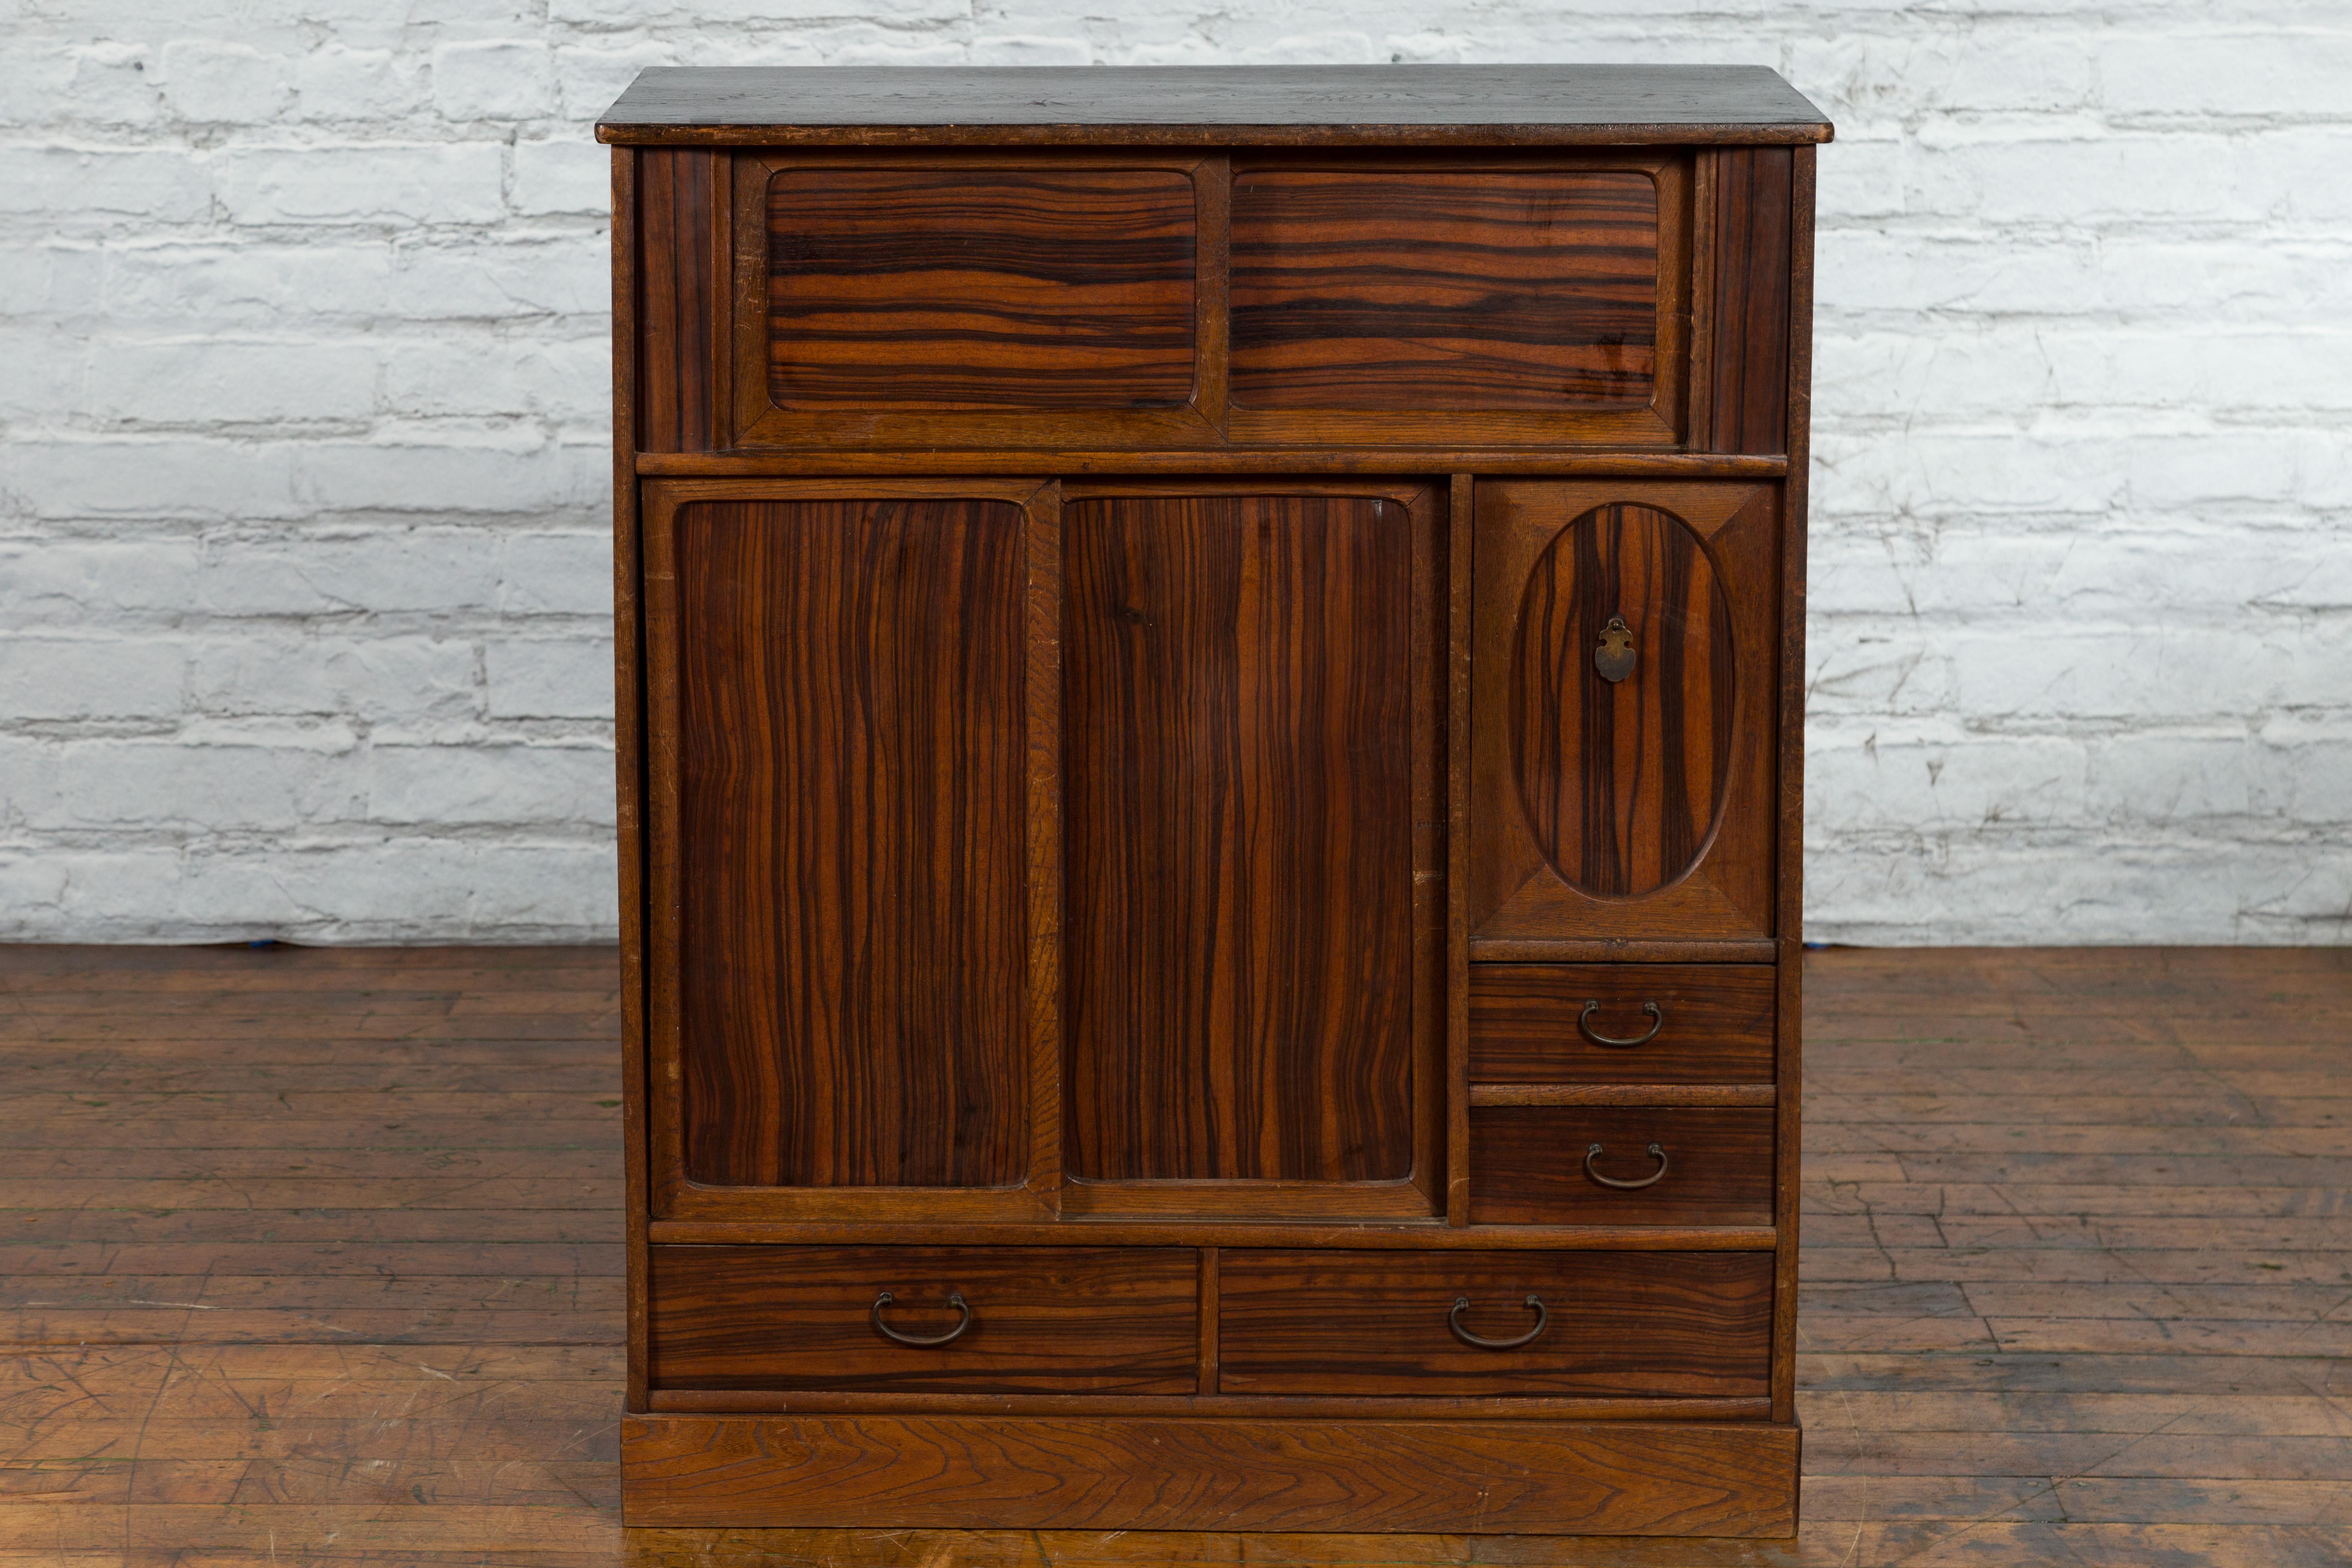 An antique Japanese zebra wood cabinet from the 19th century with four drawers, storage compartments and sliding doors. Created in Japan during the 19th century, this cabinet features a linear silhouette perfectly complimented by a zebra wood